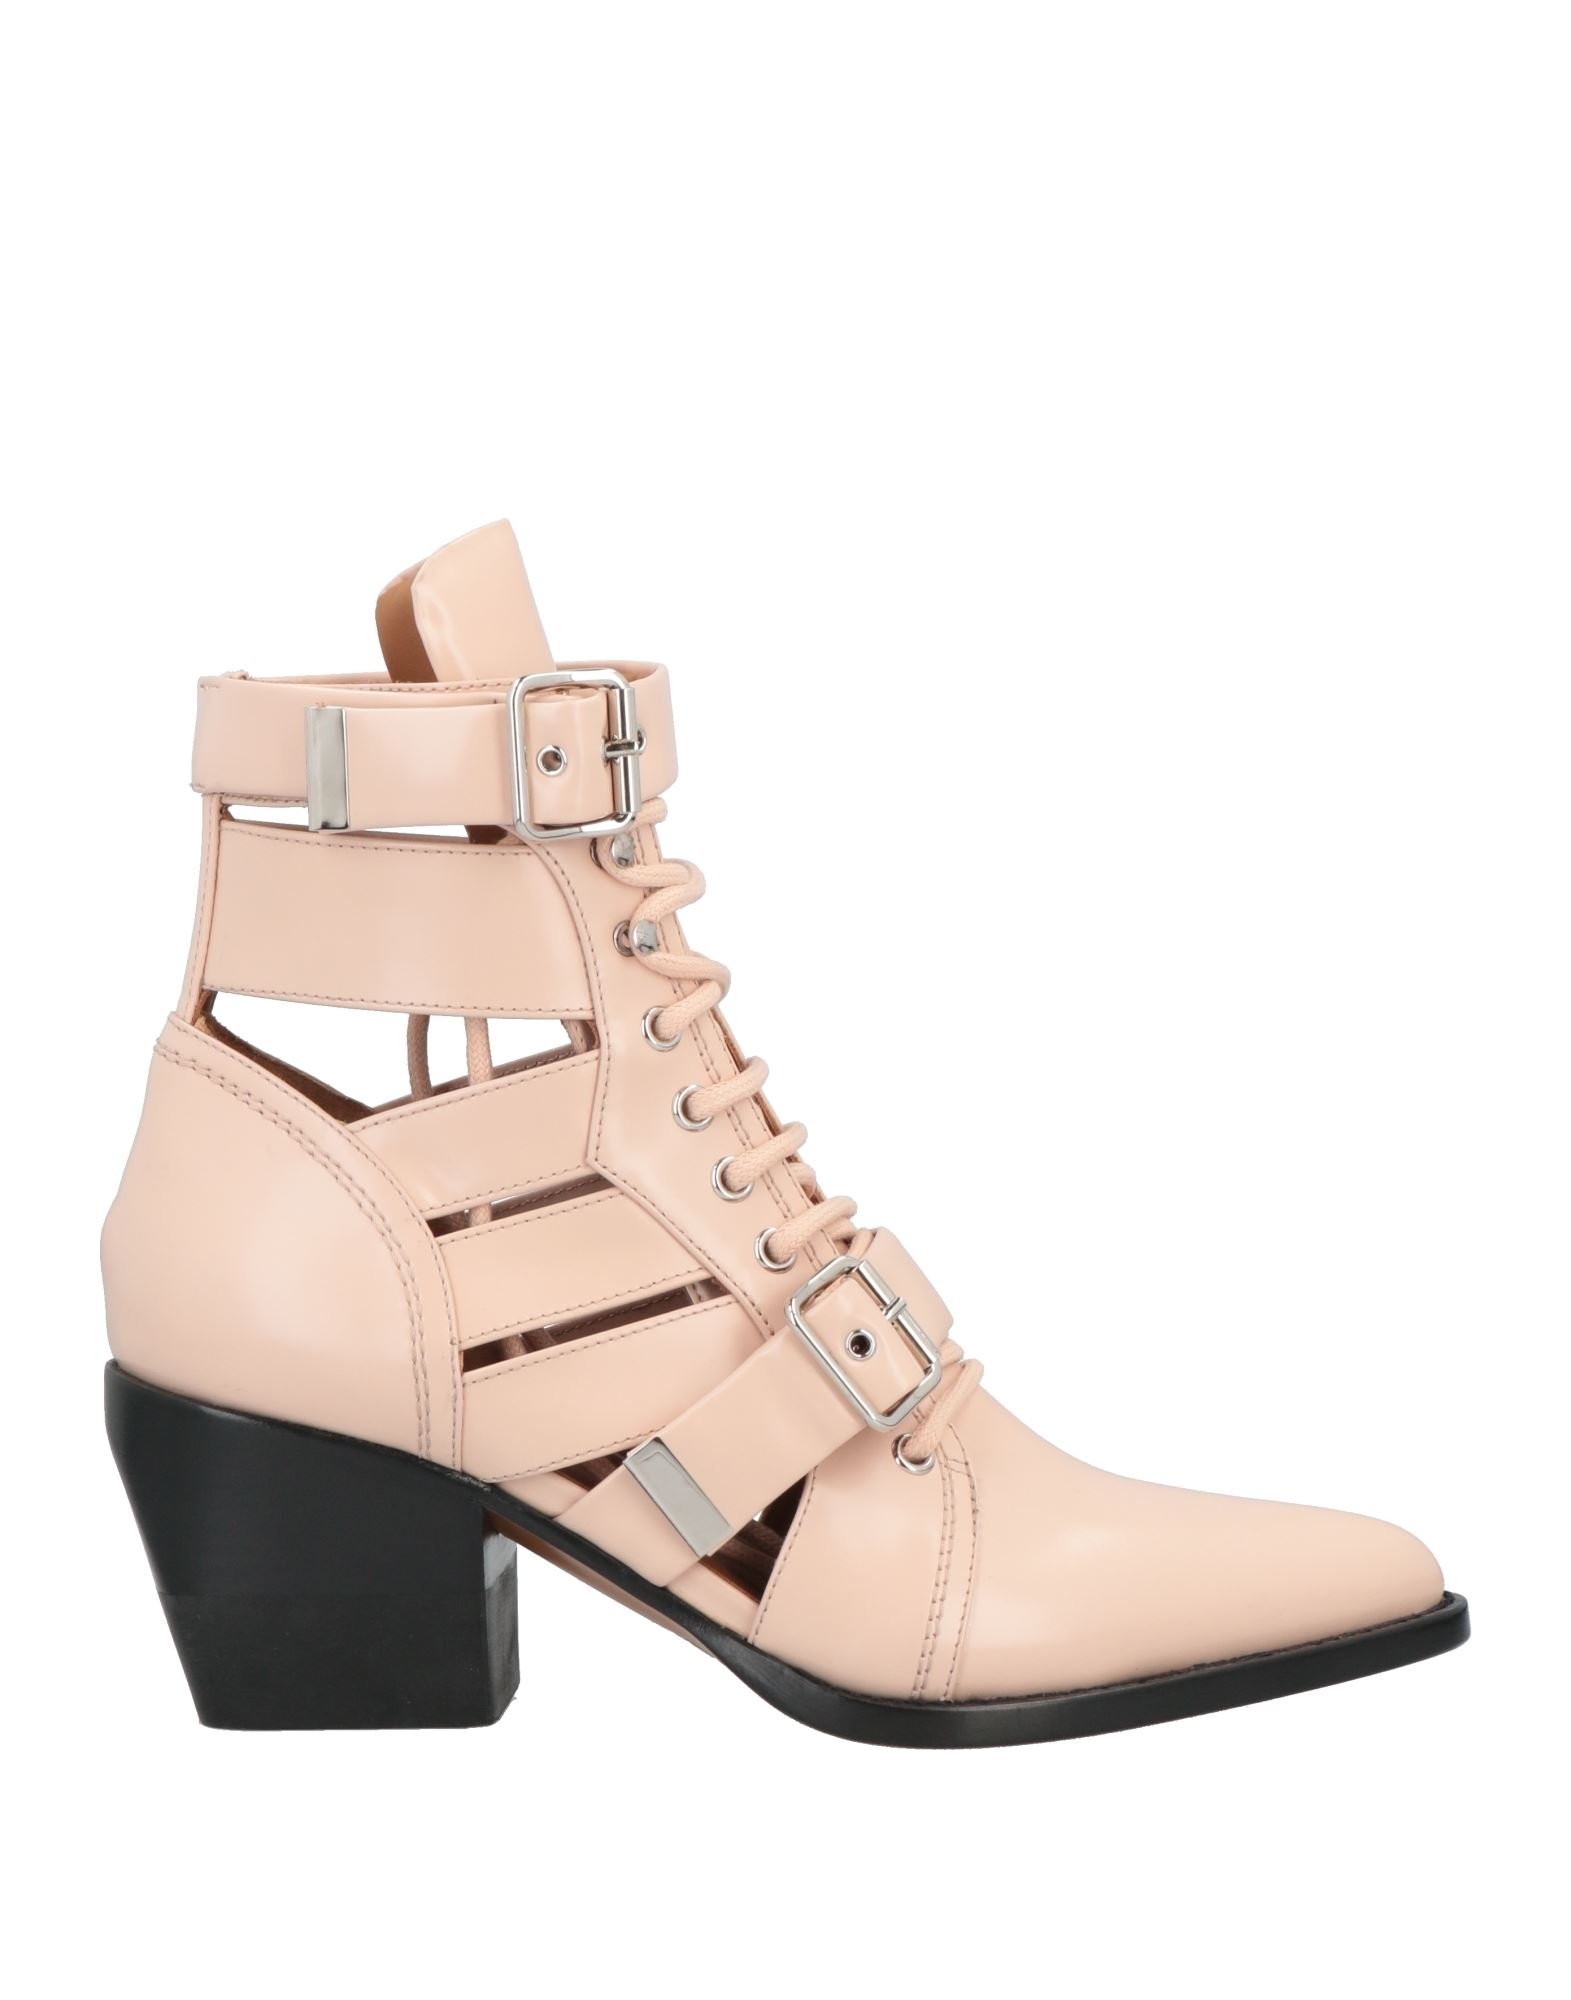 Chloé Ankle Boots In Blush